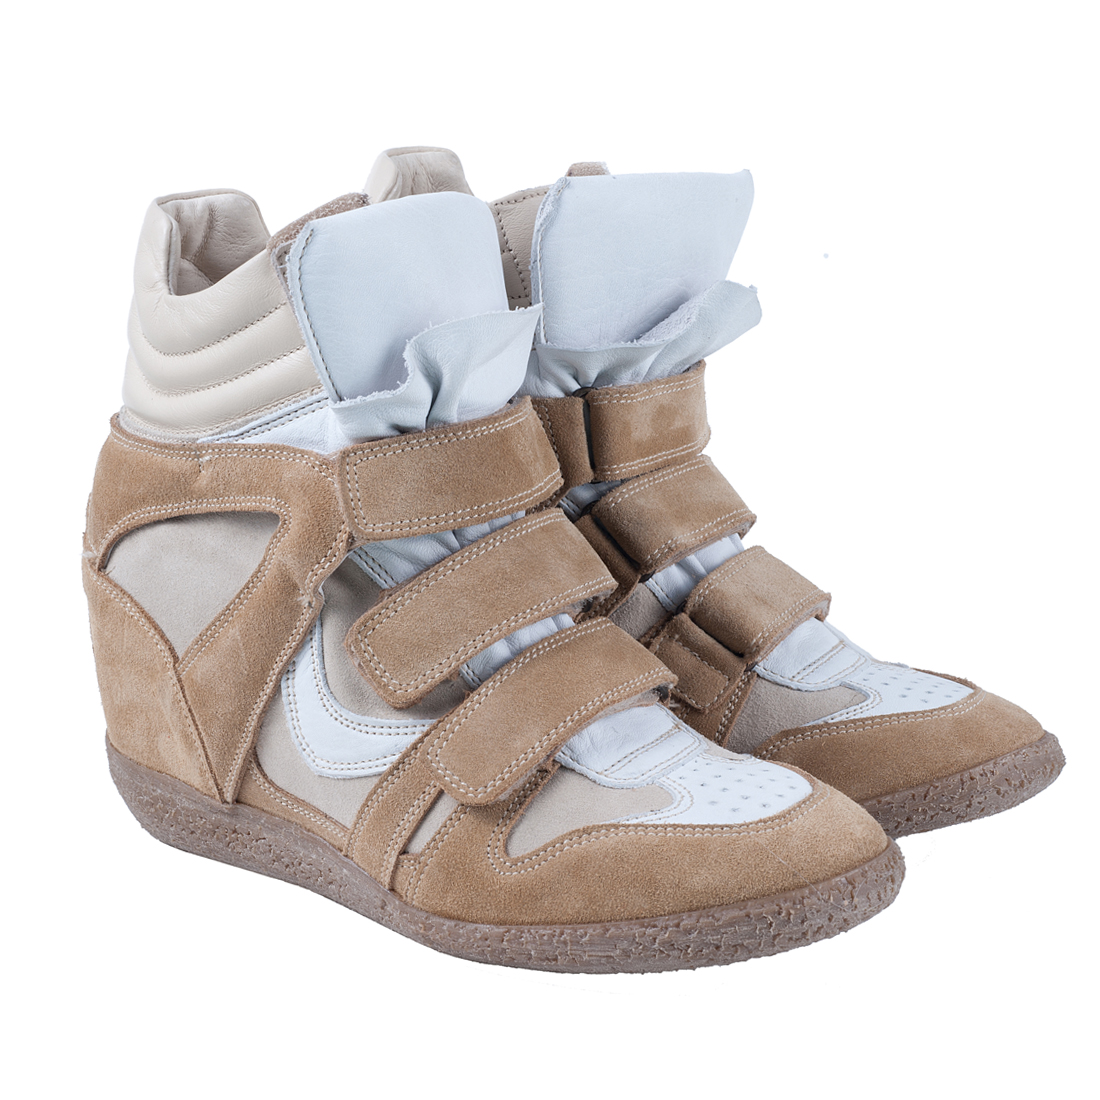 The Outfitters: Wedges Sneakers